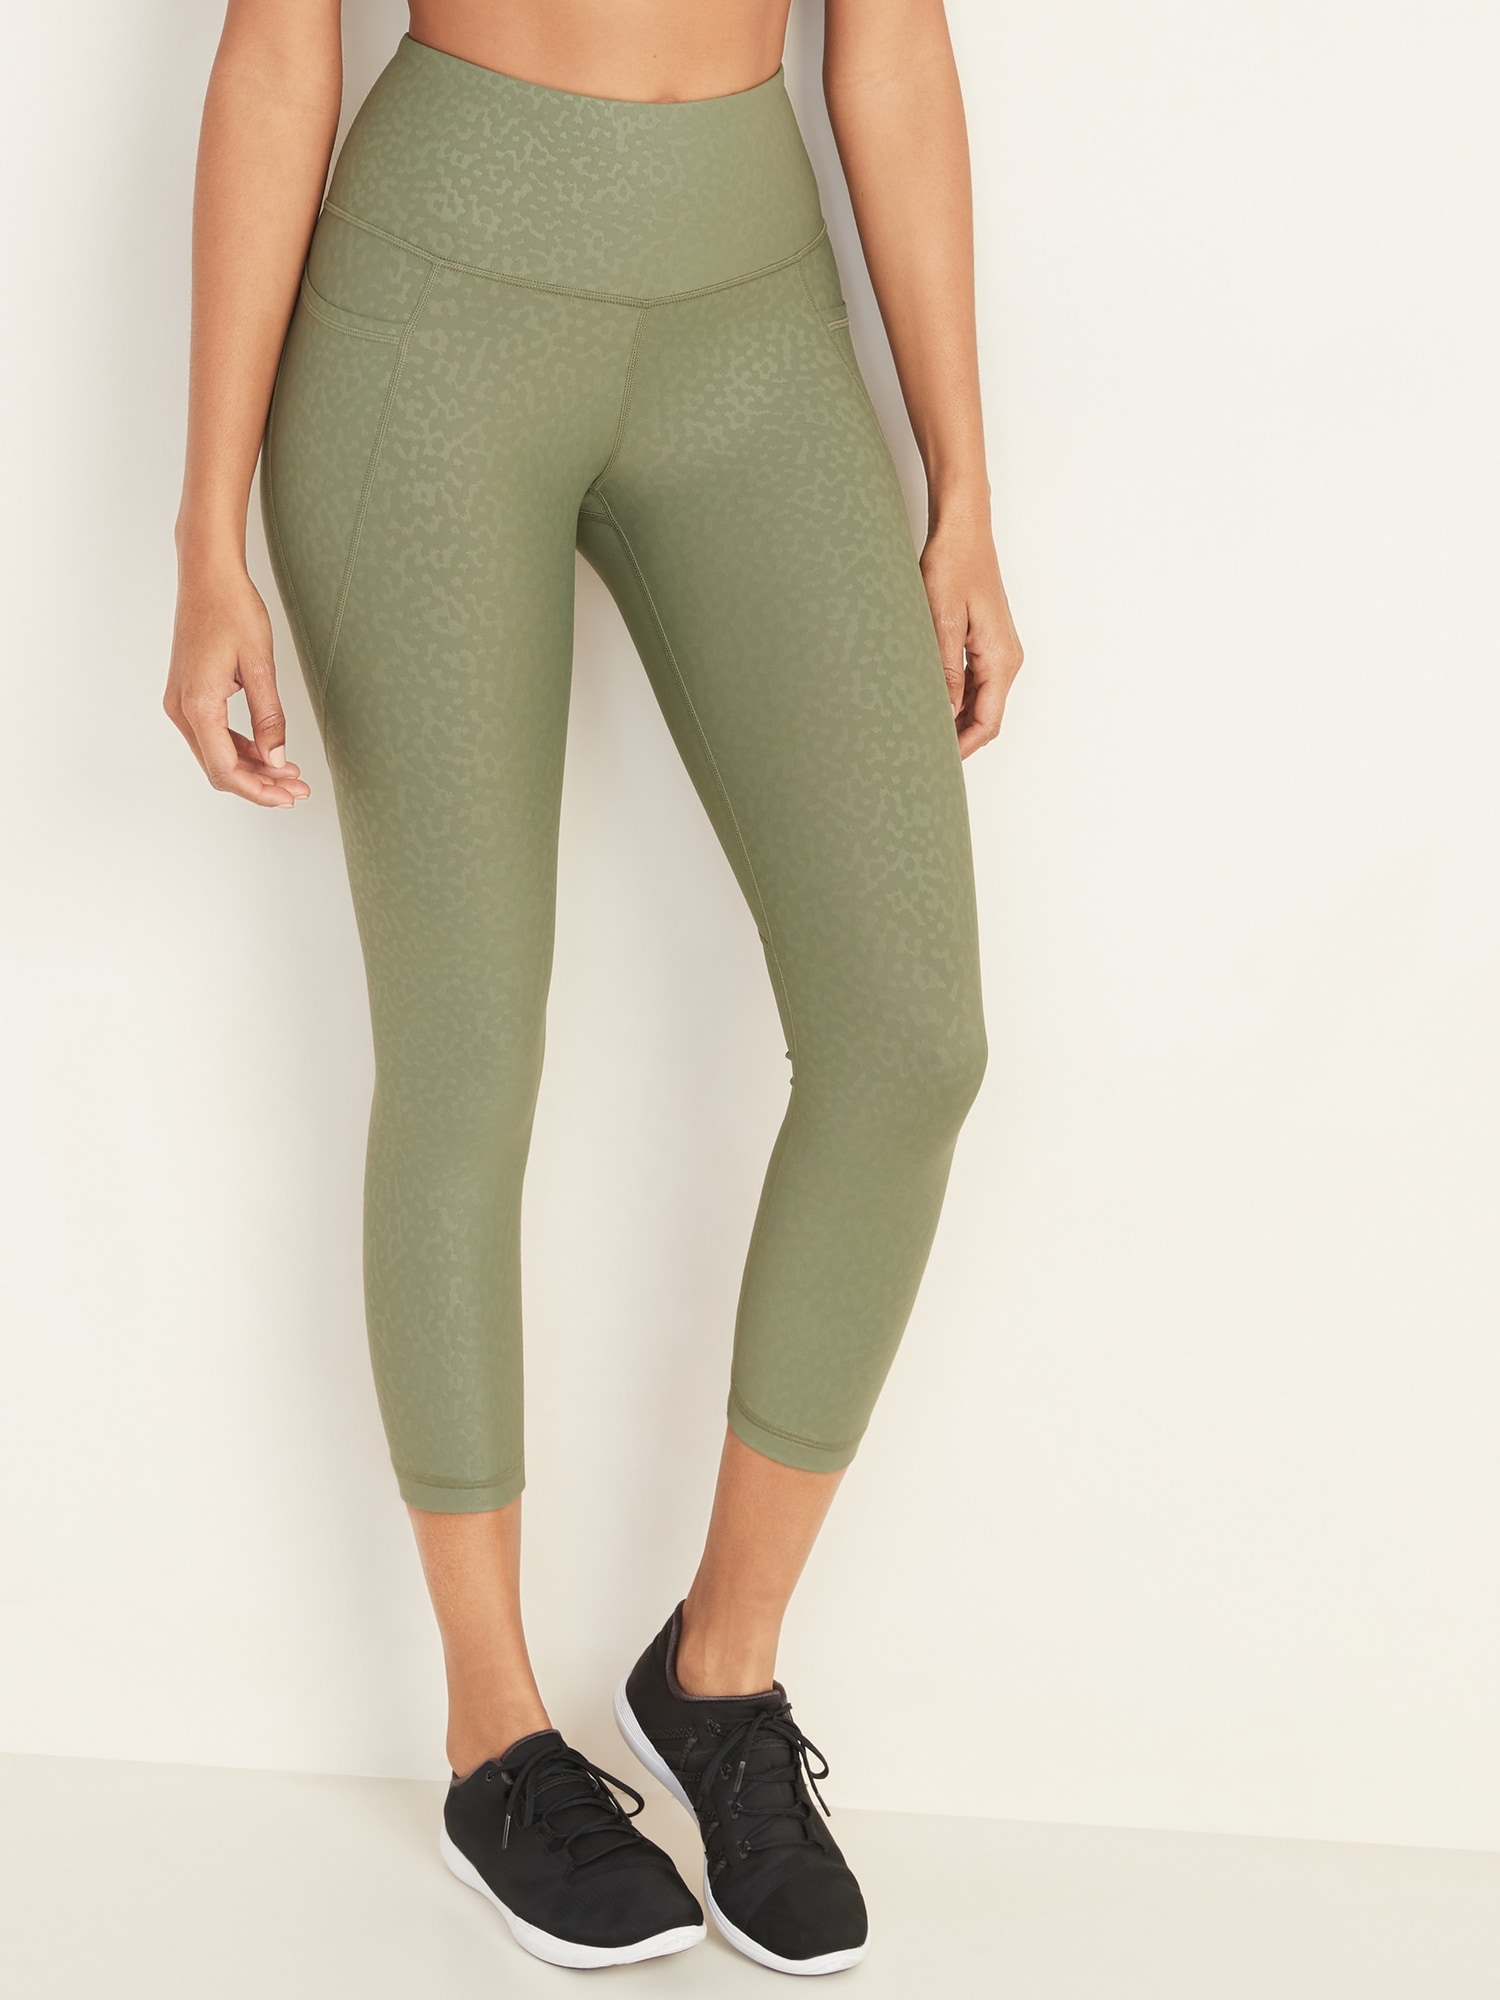 High-Waisted PowerSoft Side-Pocket Crop Leggings for Women, Old Navy